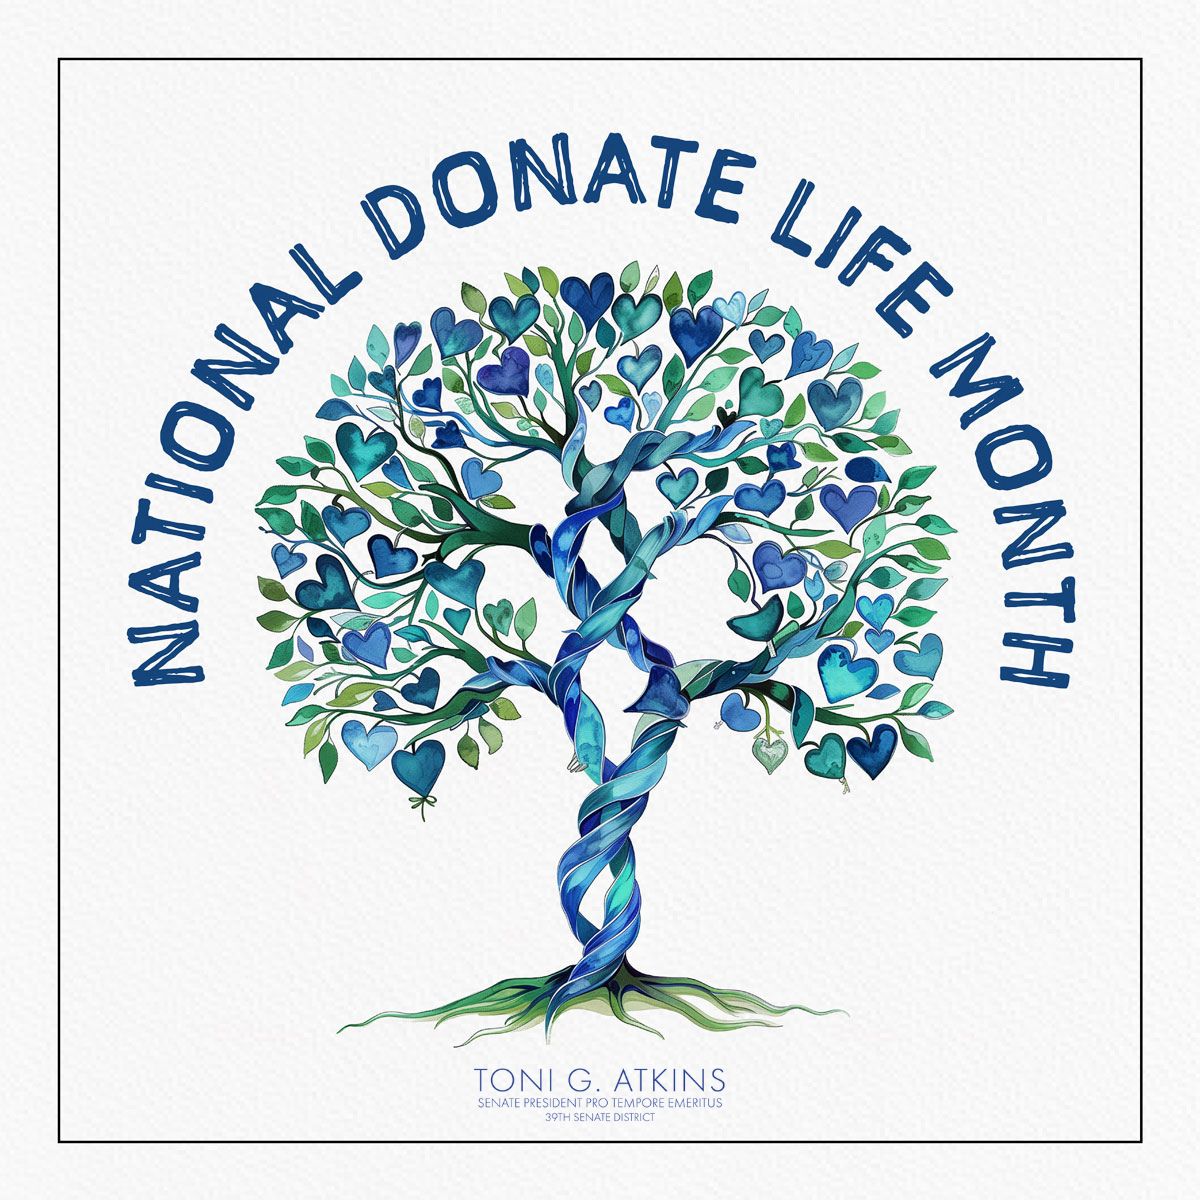 My parents were strong advocates for becoming a registered organ donor – a conviction that I carry with me to this day. During #DonateLifeMonth, I encourage you to register as an organ, eye, and tissue donors and honor those who have saved lives through organ donation.